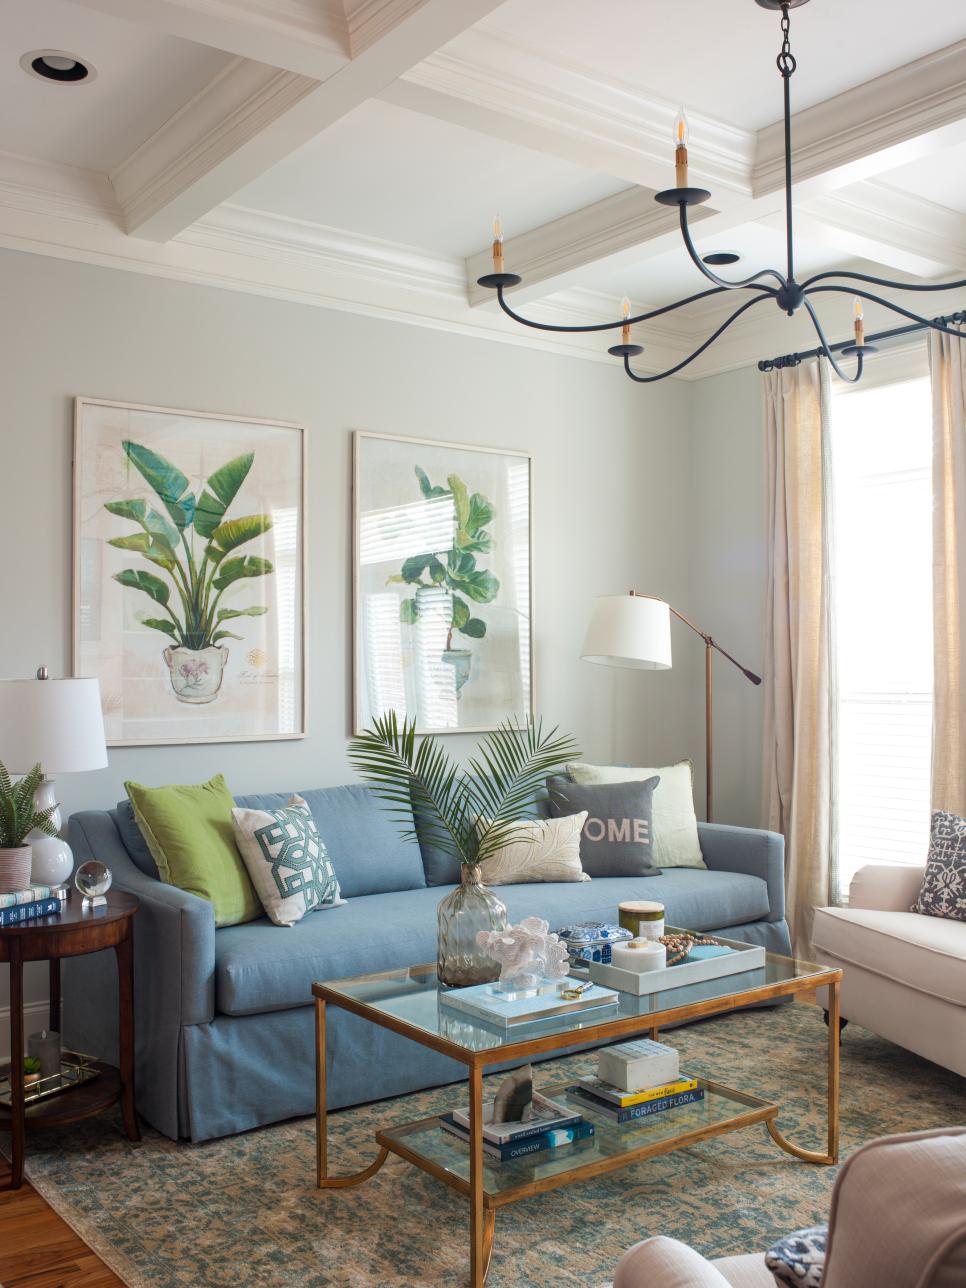 Transitional Living Room With Blue Sofa HGTV